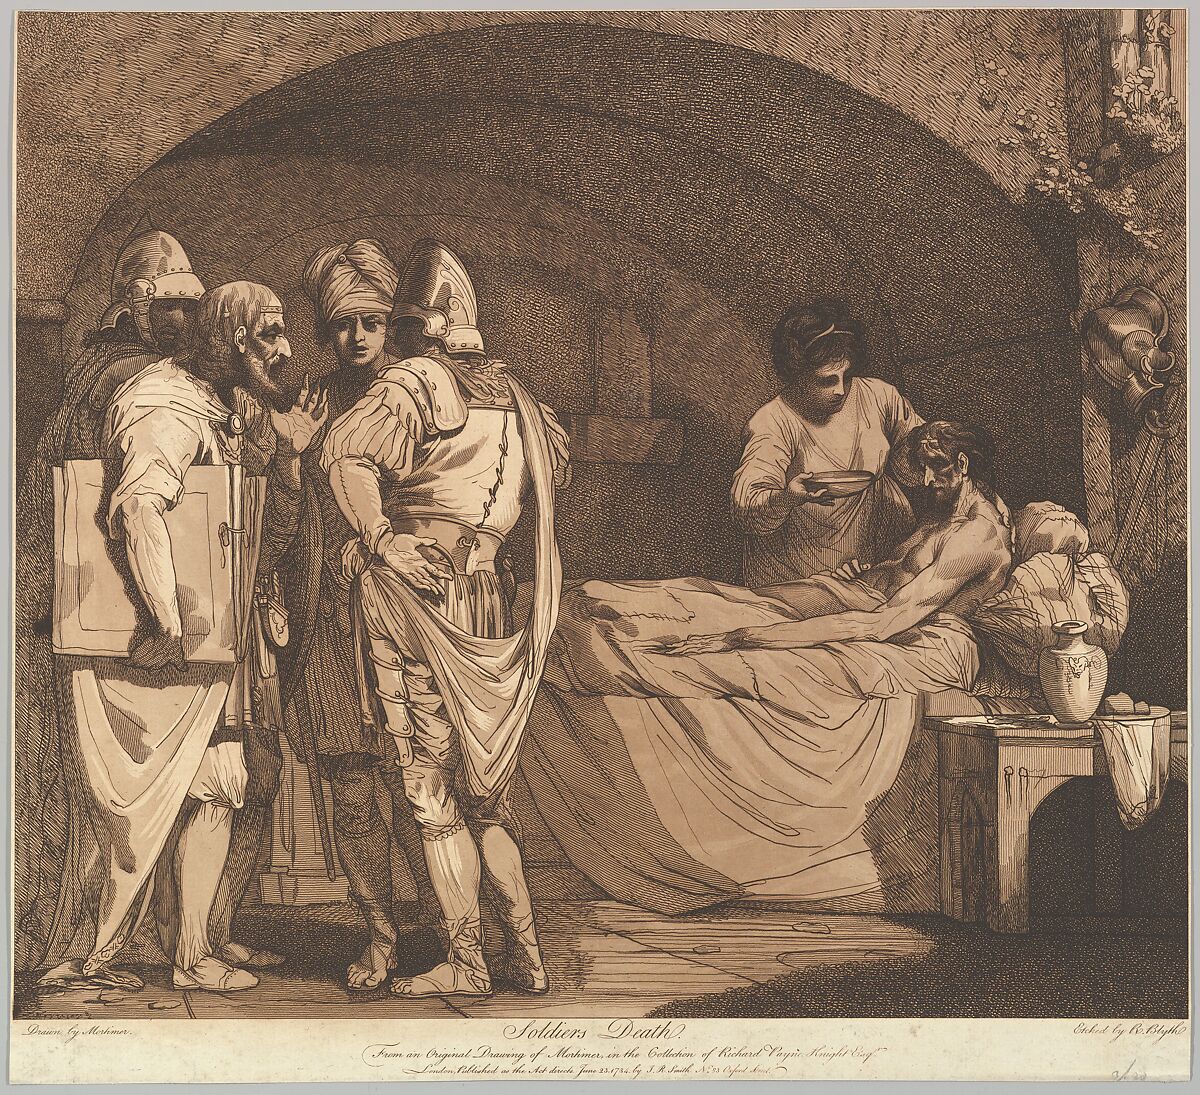 Soldier's Death, from "The Life and Death of a Soldier", Etched and published by Robert Blyth (British, ca. 1750–1784), Etching and aquatint, printed in brown ink 